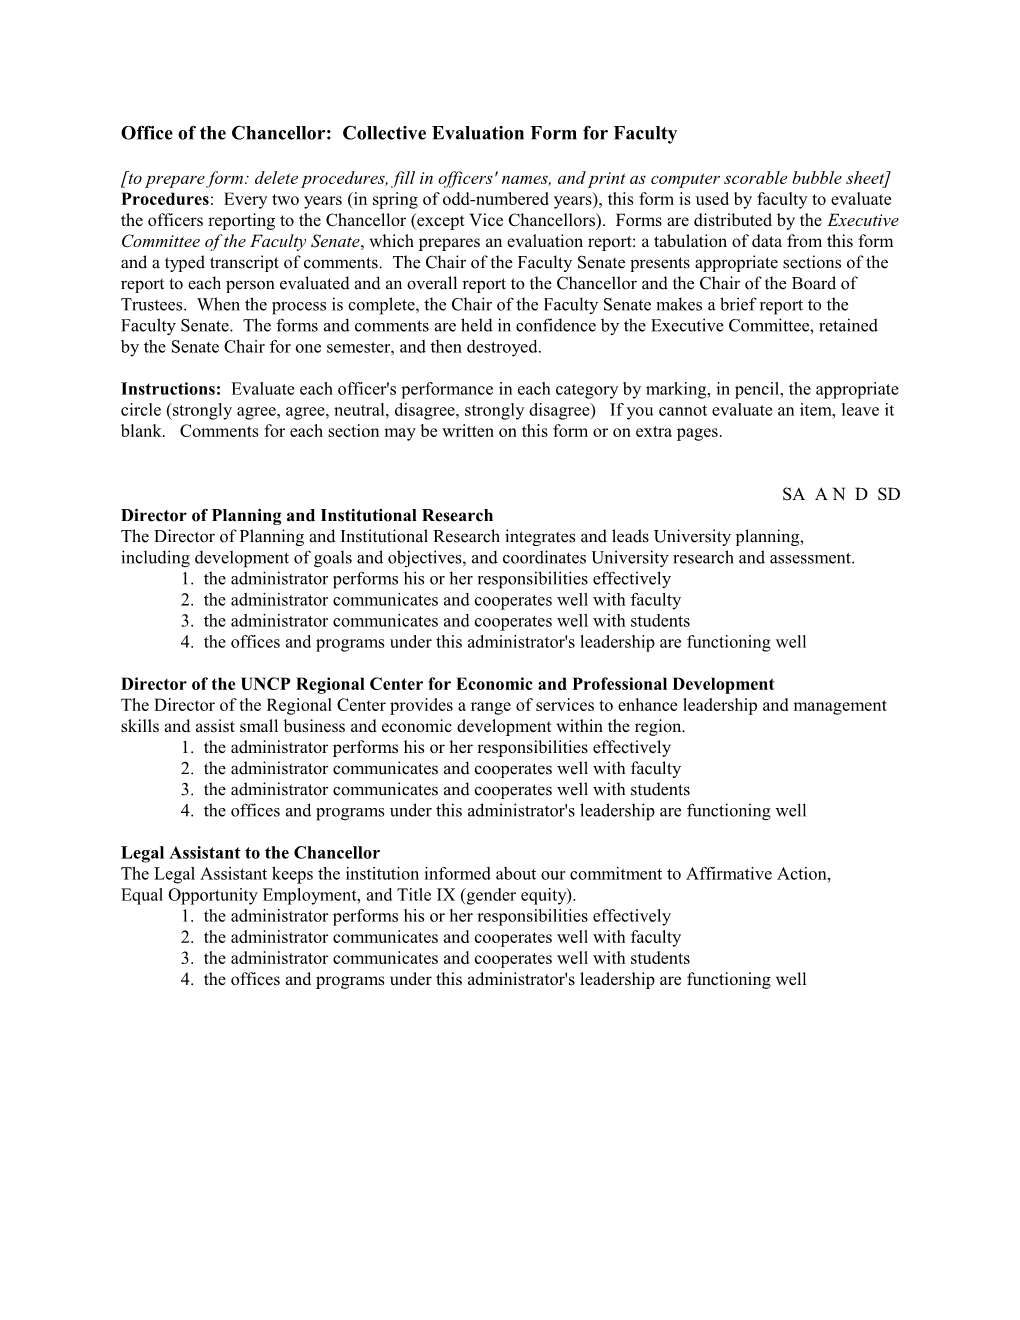 Office of the Chancellor: Collective Evaluation Form for Faculty